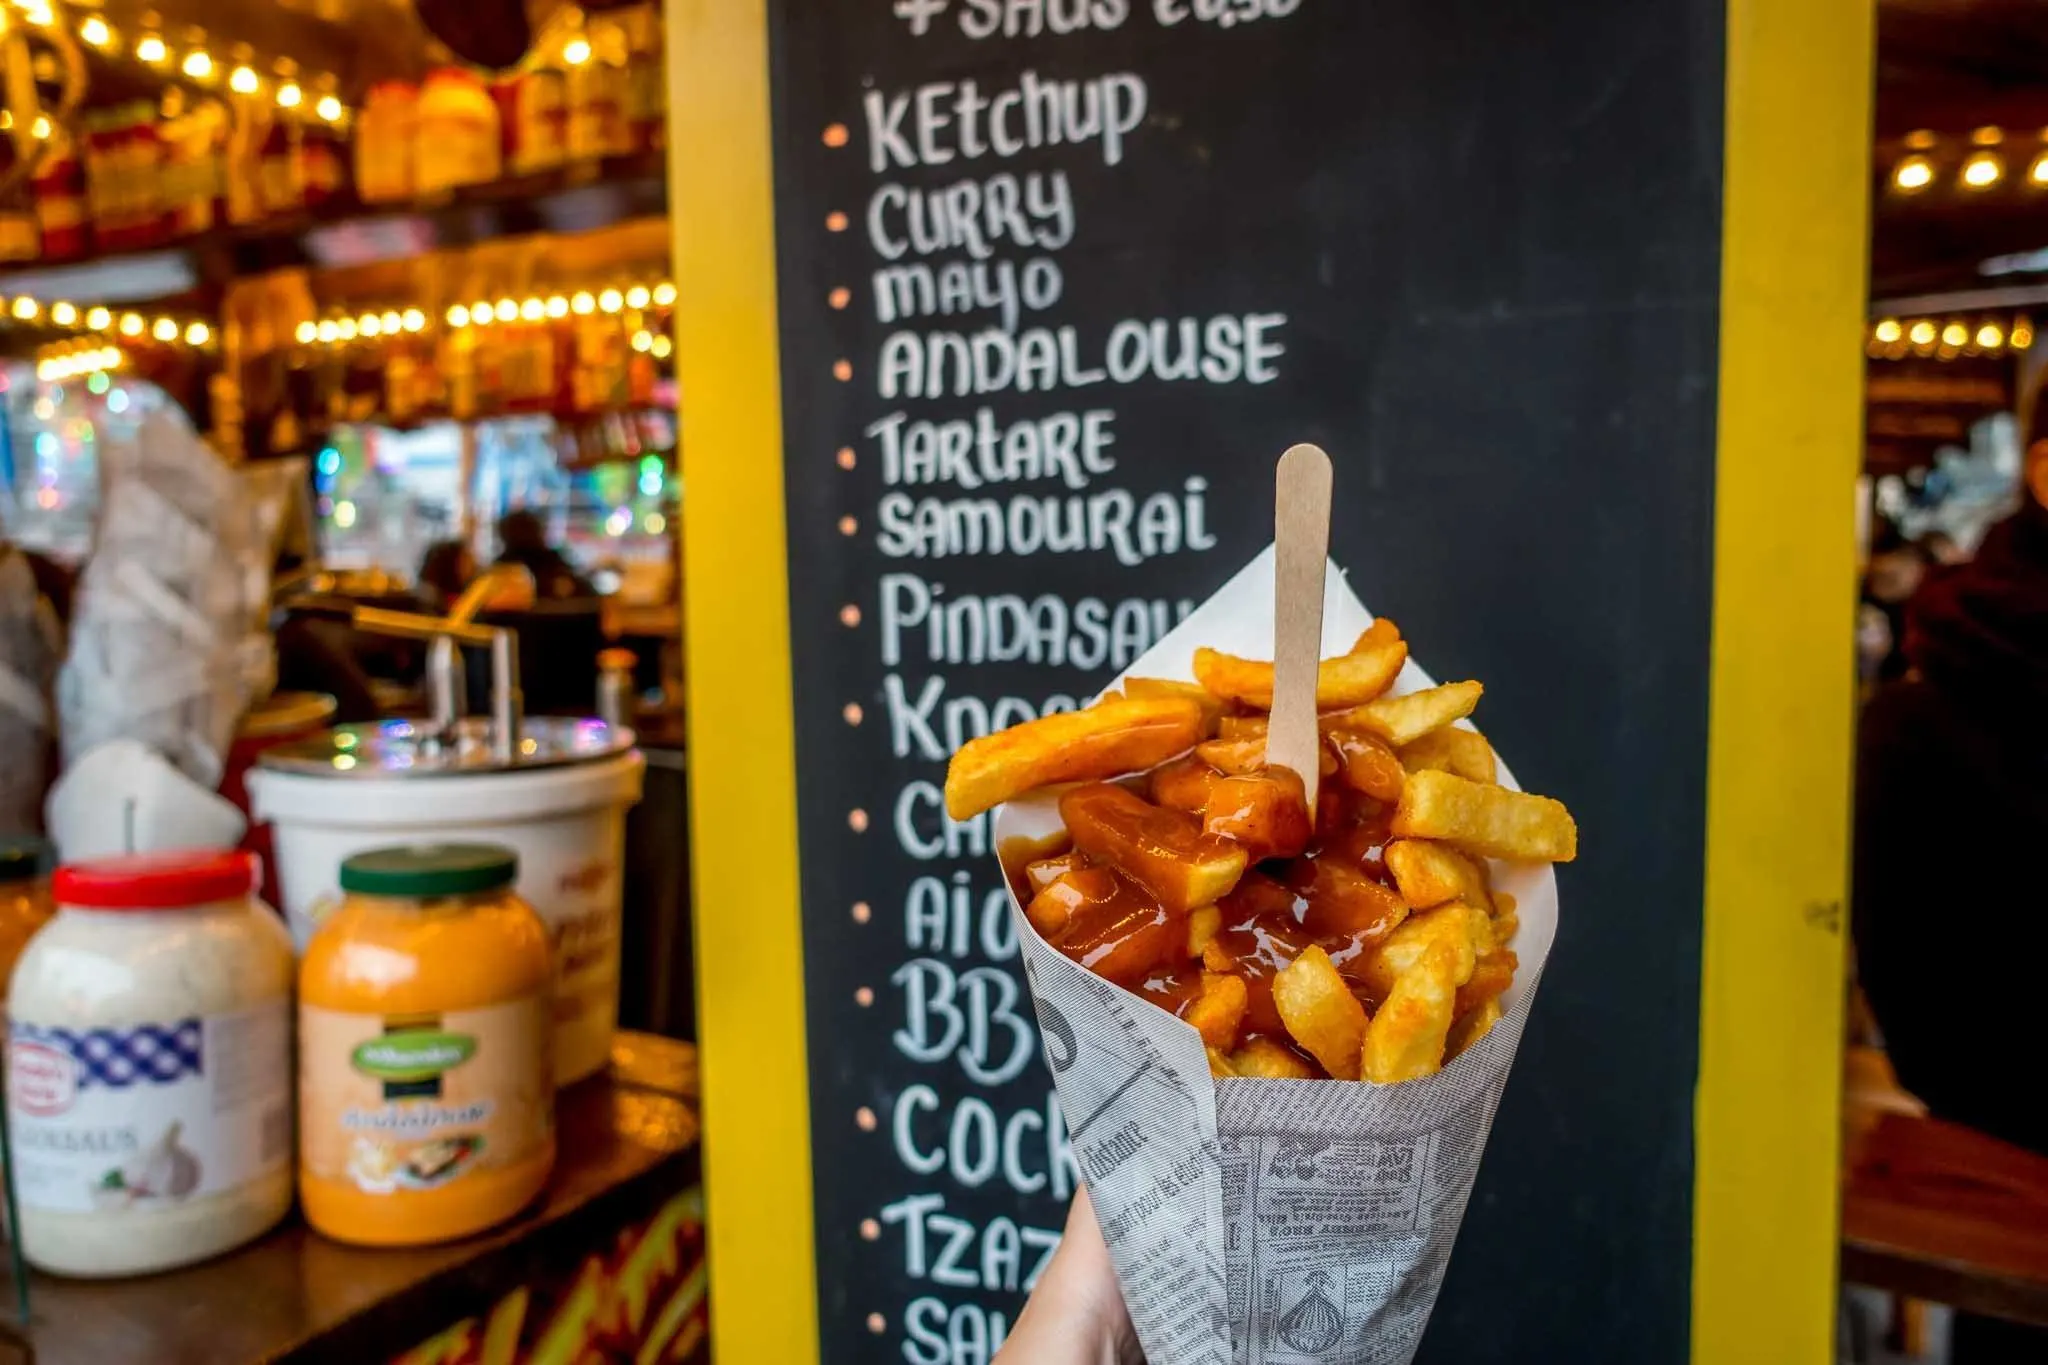 French fries topped with brown sauce